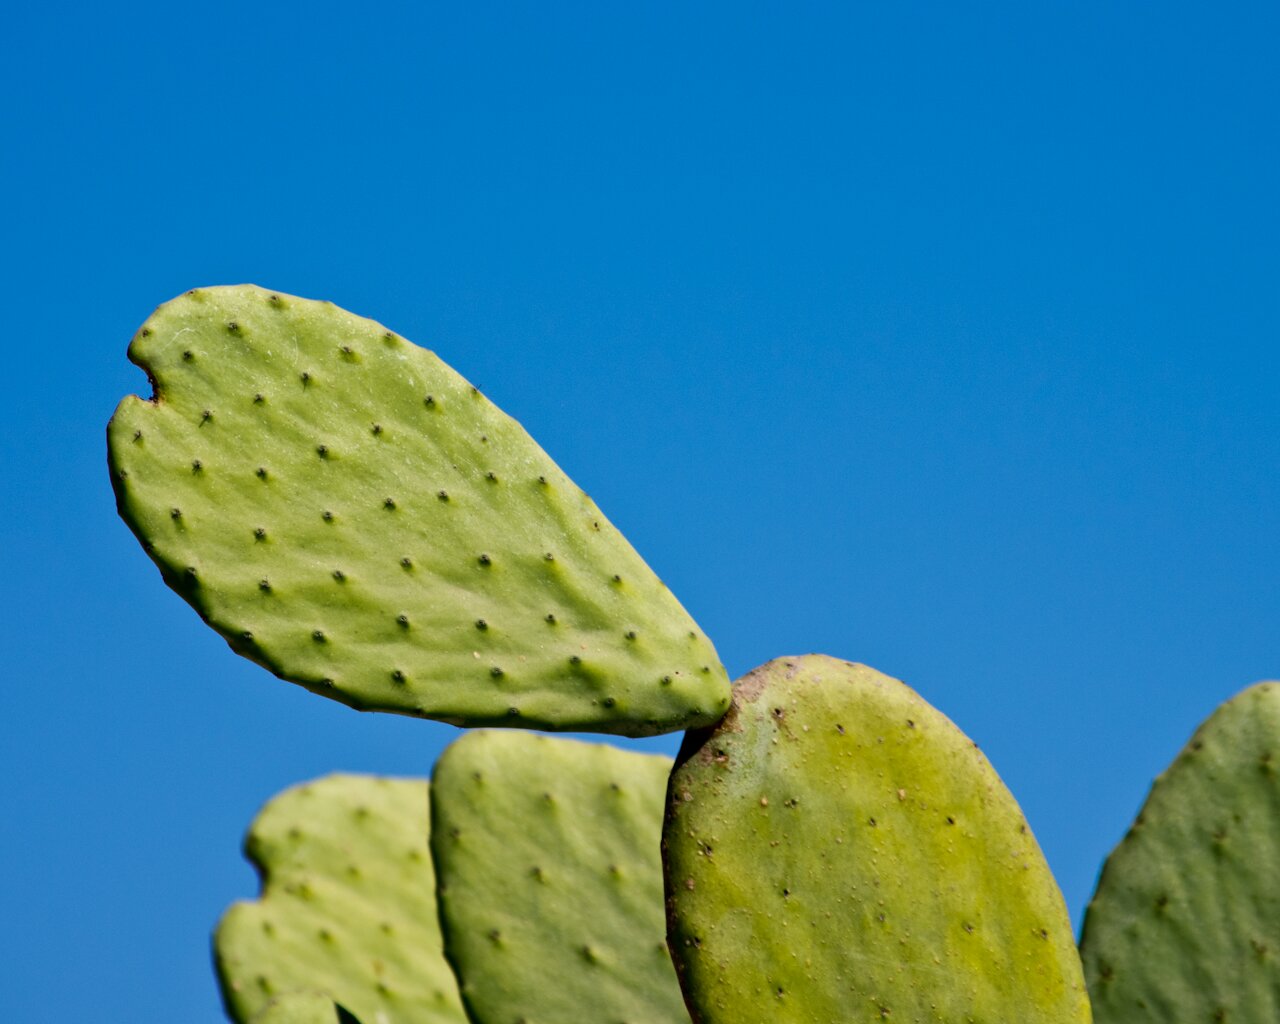 This cactus illustrates the best way to get vitamin D: live in Mexico. (Photo: MvB)